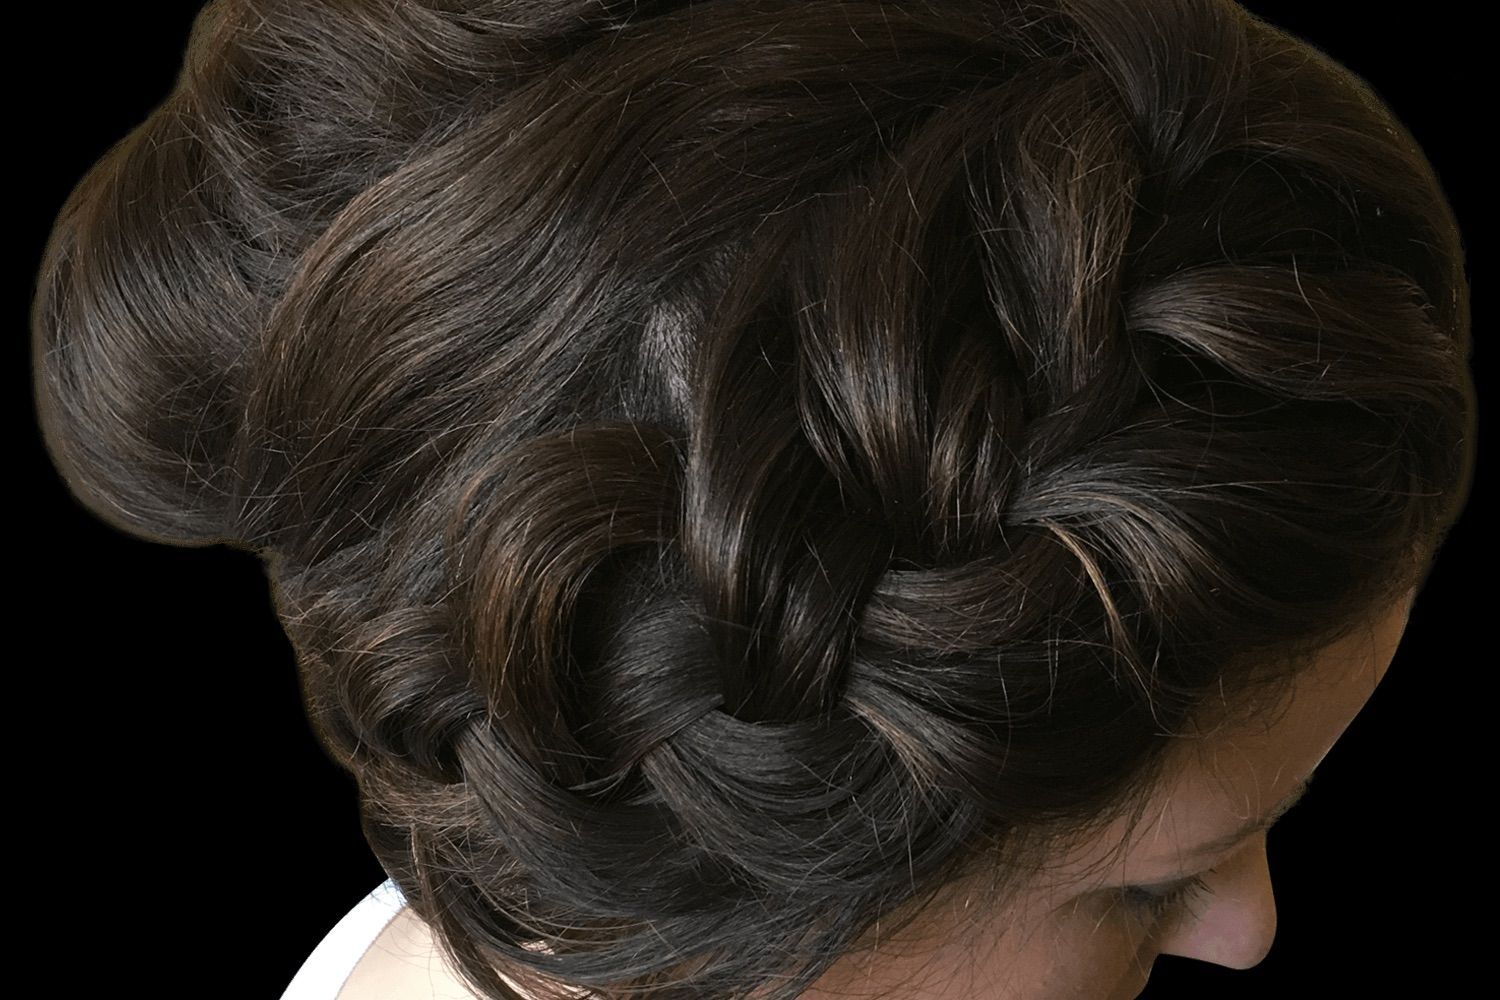 Hairstyle for special occasions portfolio